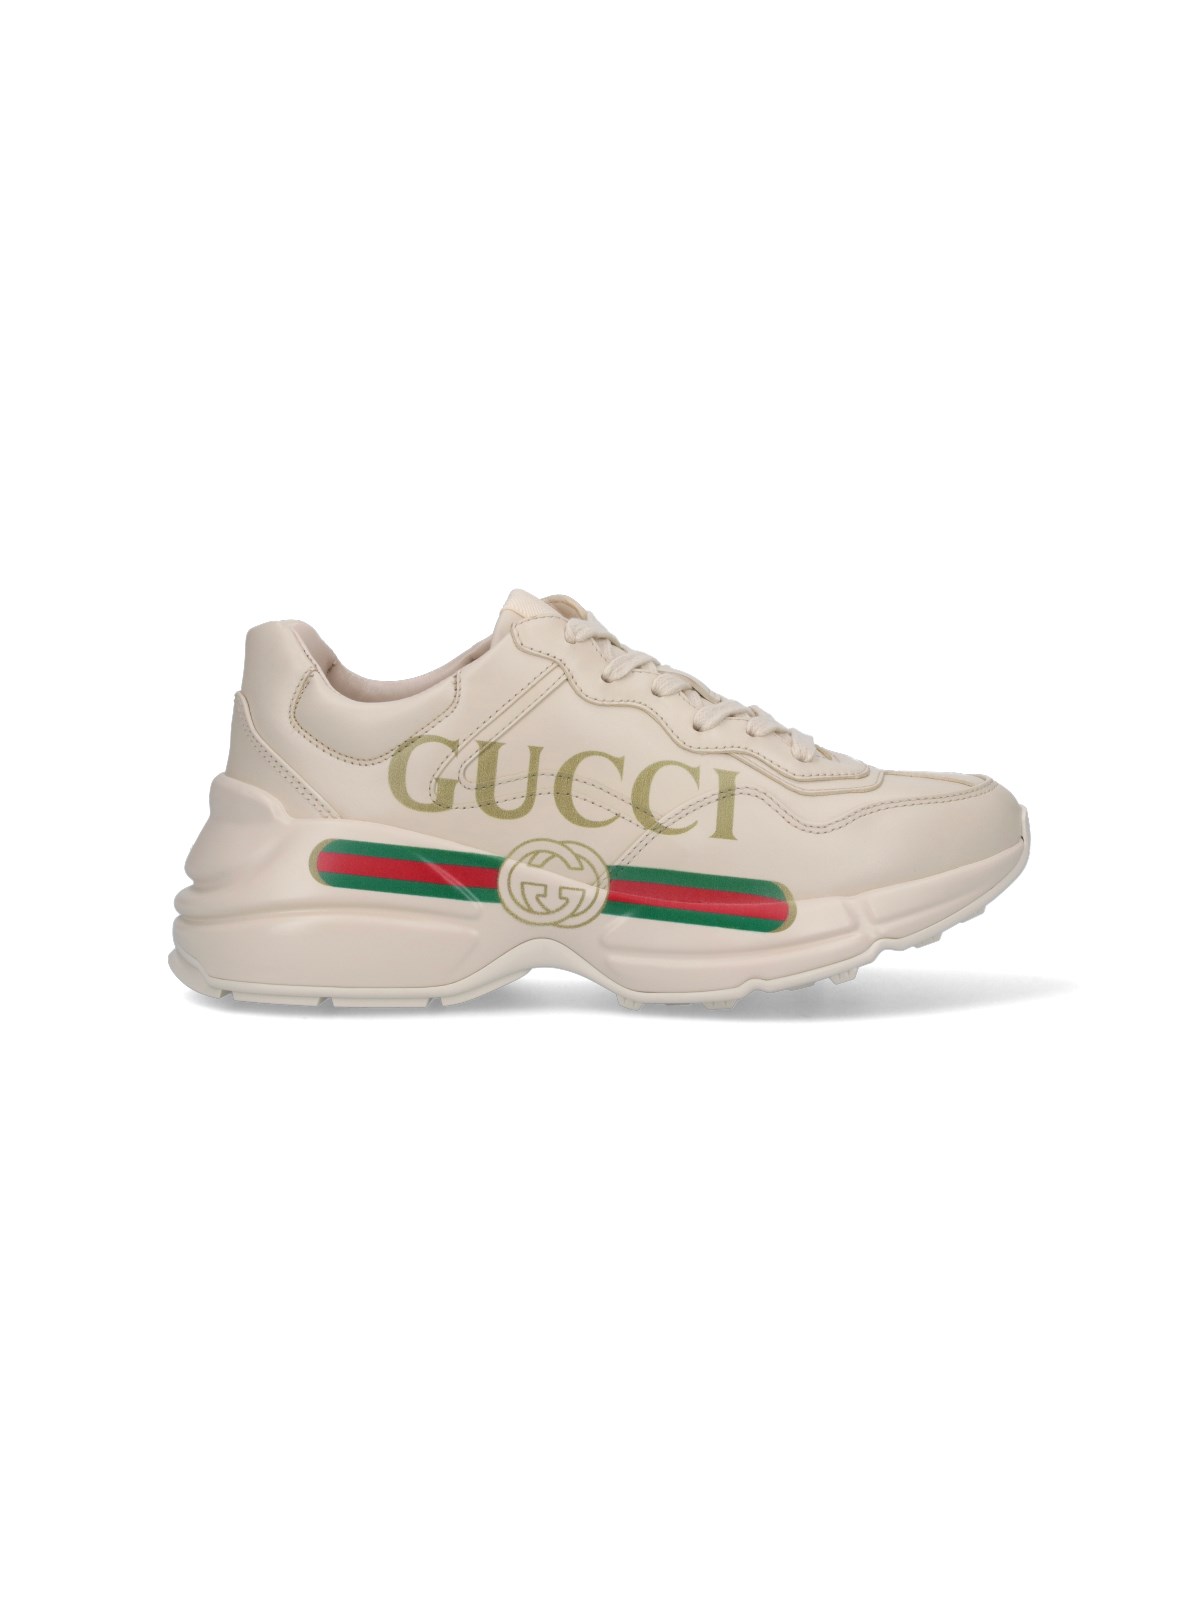 Gucci 'rhyton' Sneakers In White